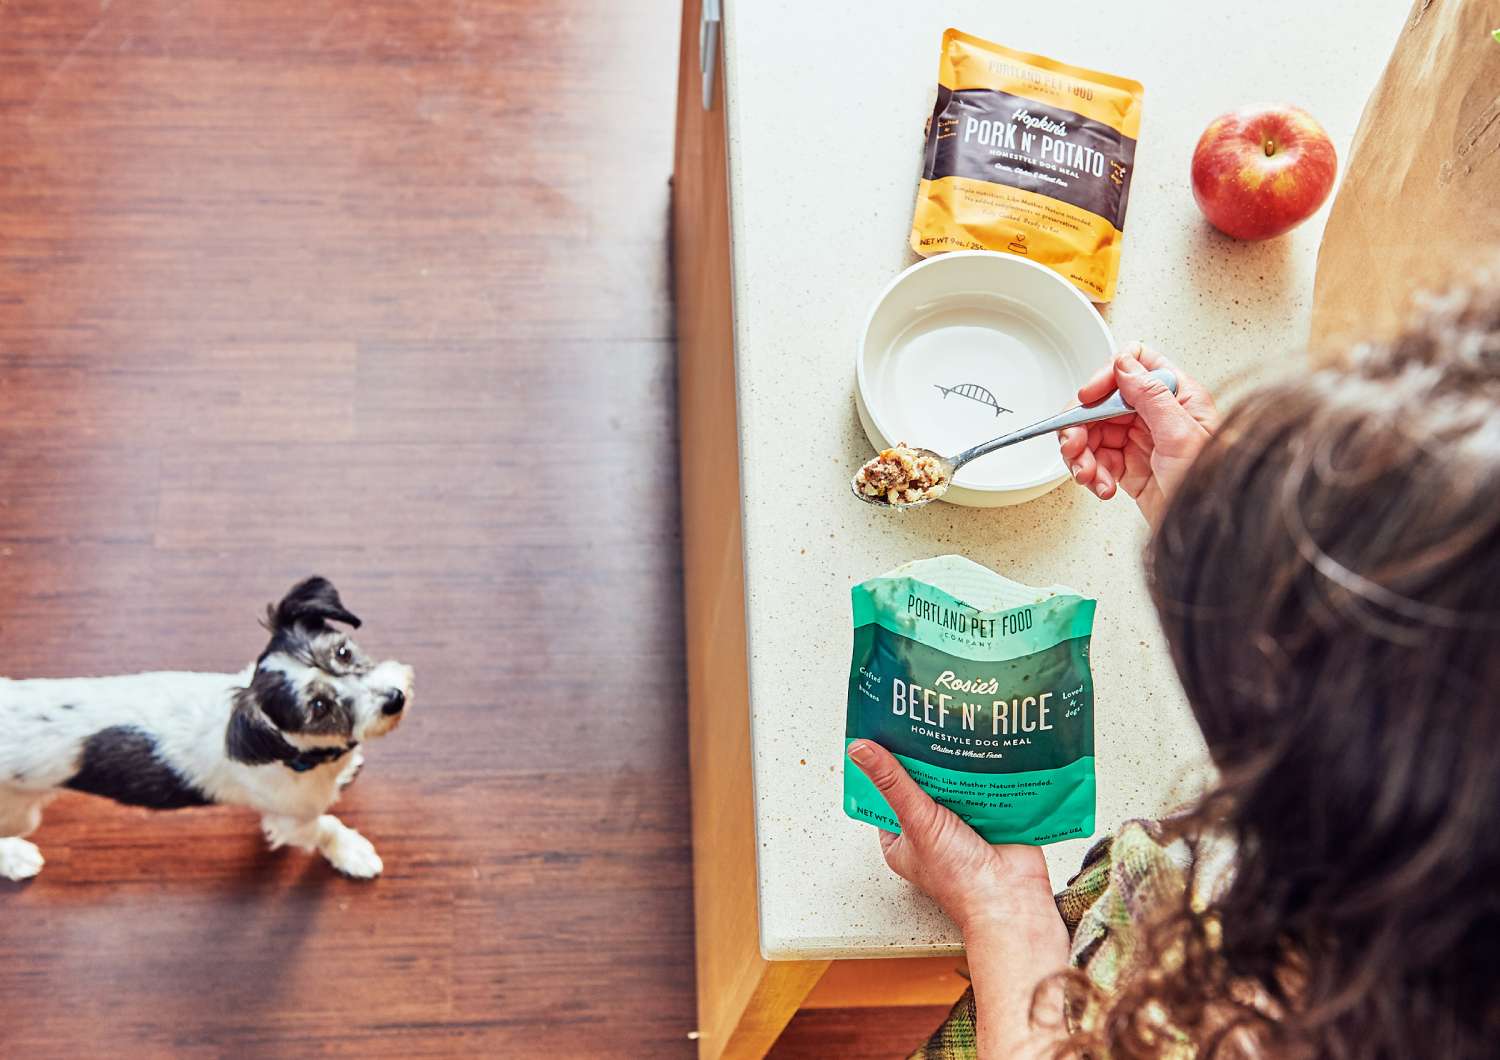 portland-pet-food-co-rosies-beef-rice-sustainable-pet-products-dog-begging-for-treats